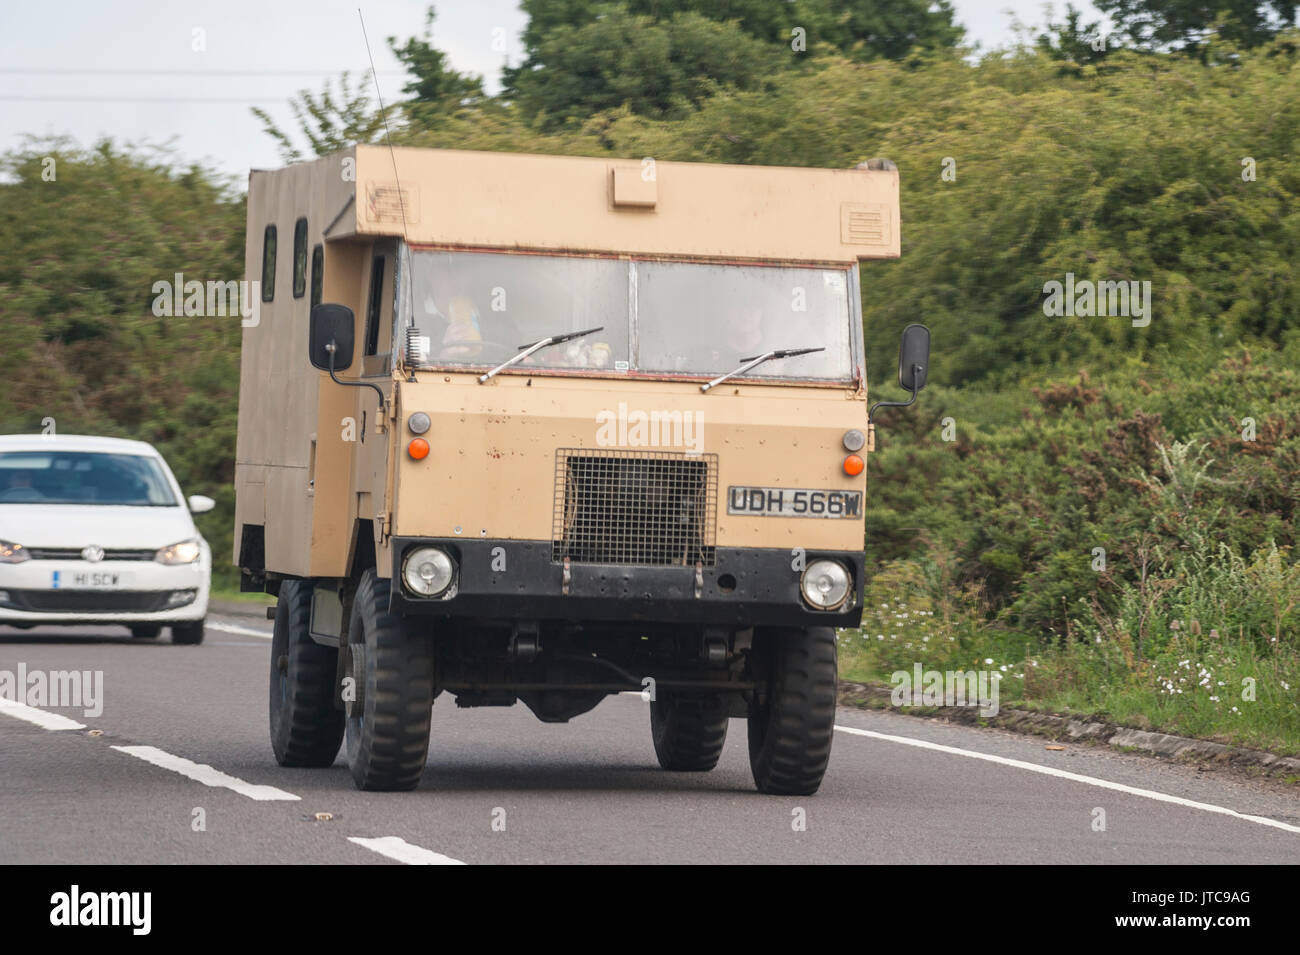 A classic MOD vehicle driving on a main road in the Uk Stock Photo